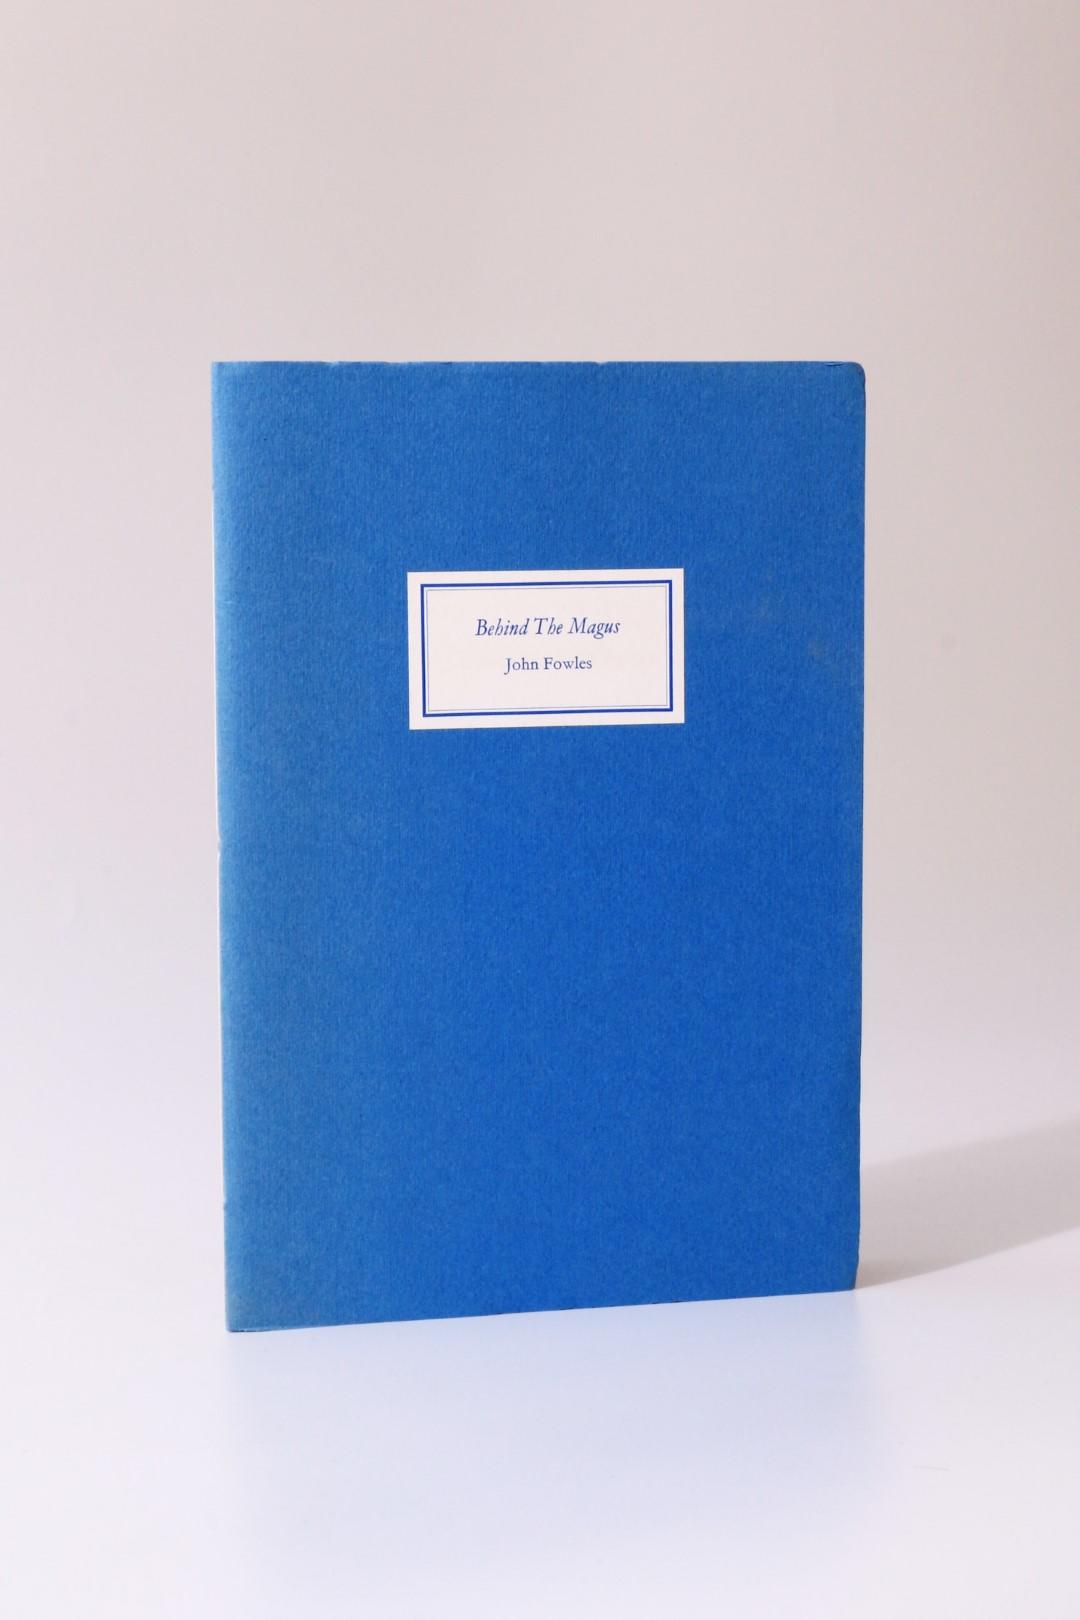 John Fowles - Behind the Magus - Colophon Press, 1994, Signed Limited Edition.